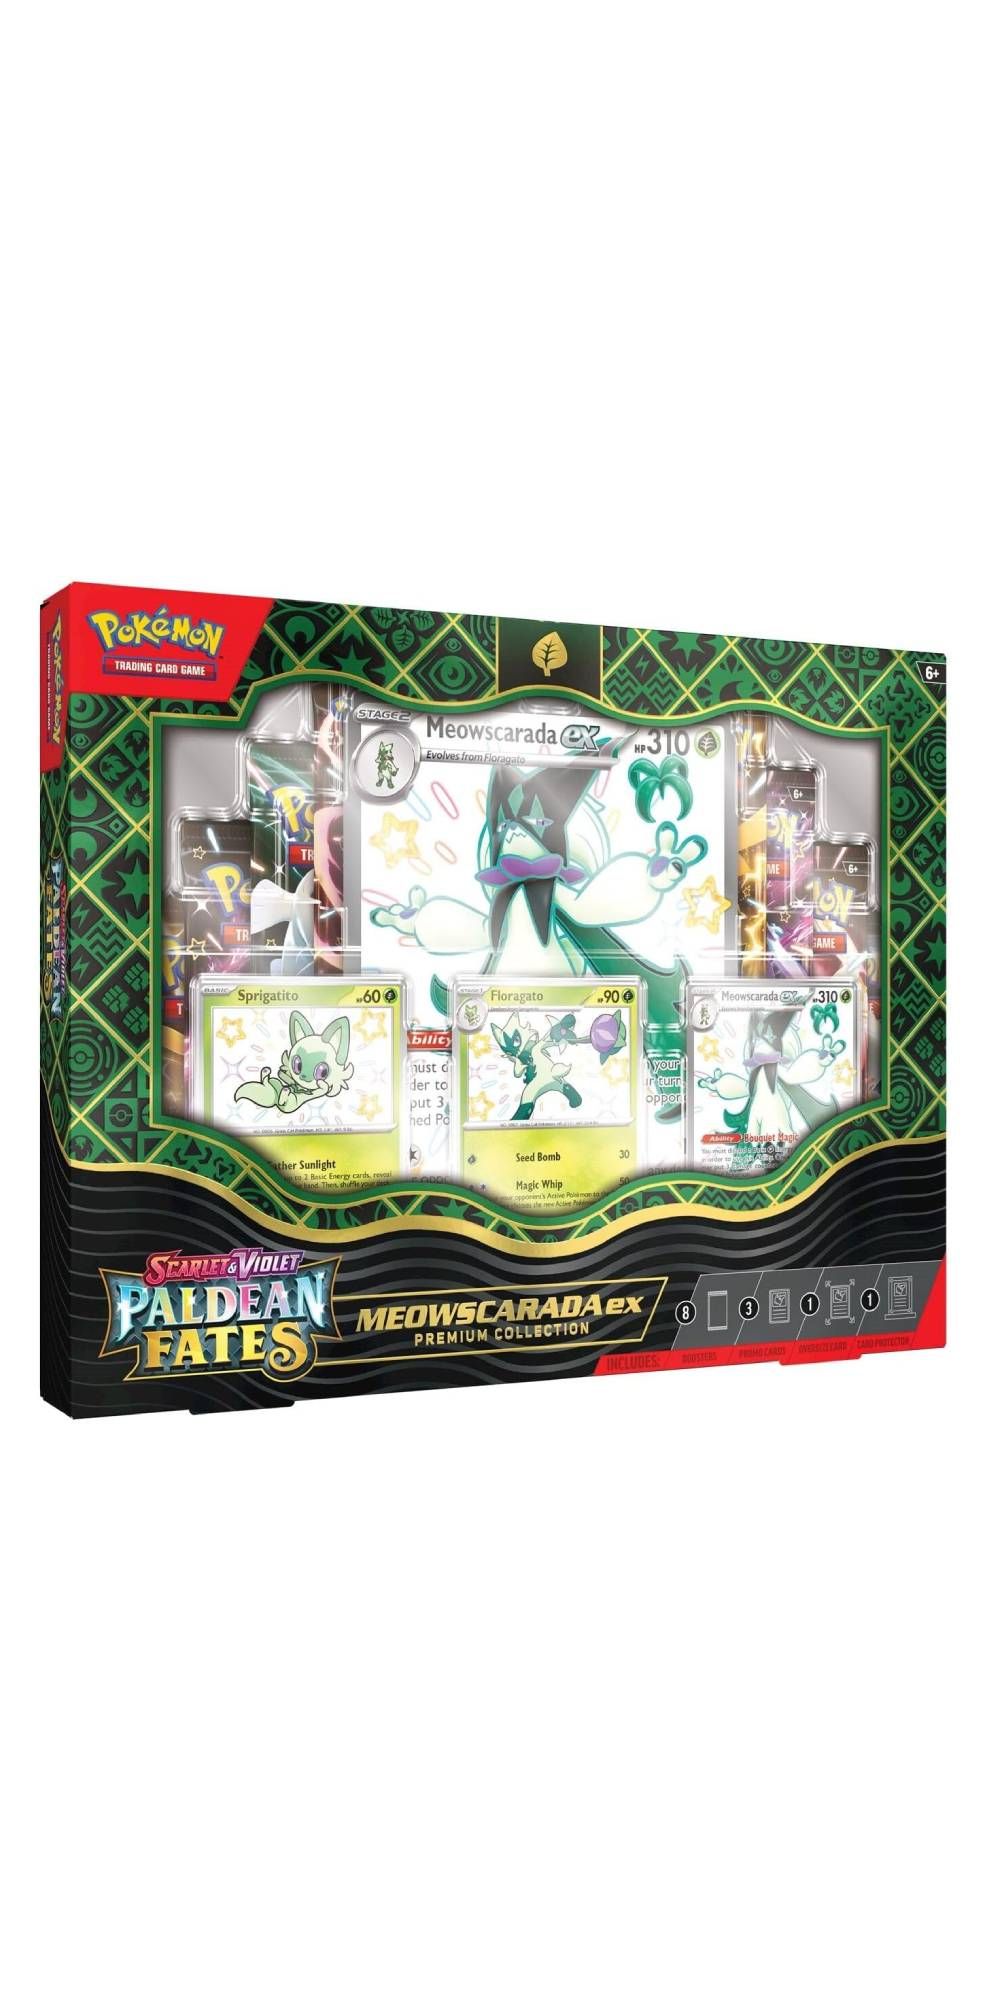 What To Buy For The Pokemon TCG's Paldean Fates